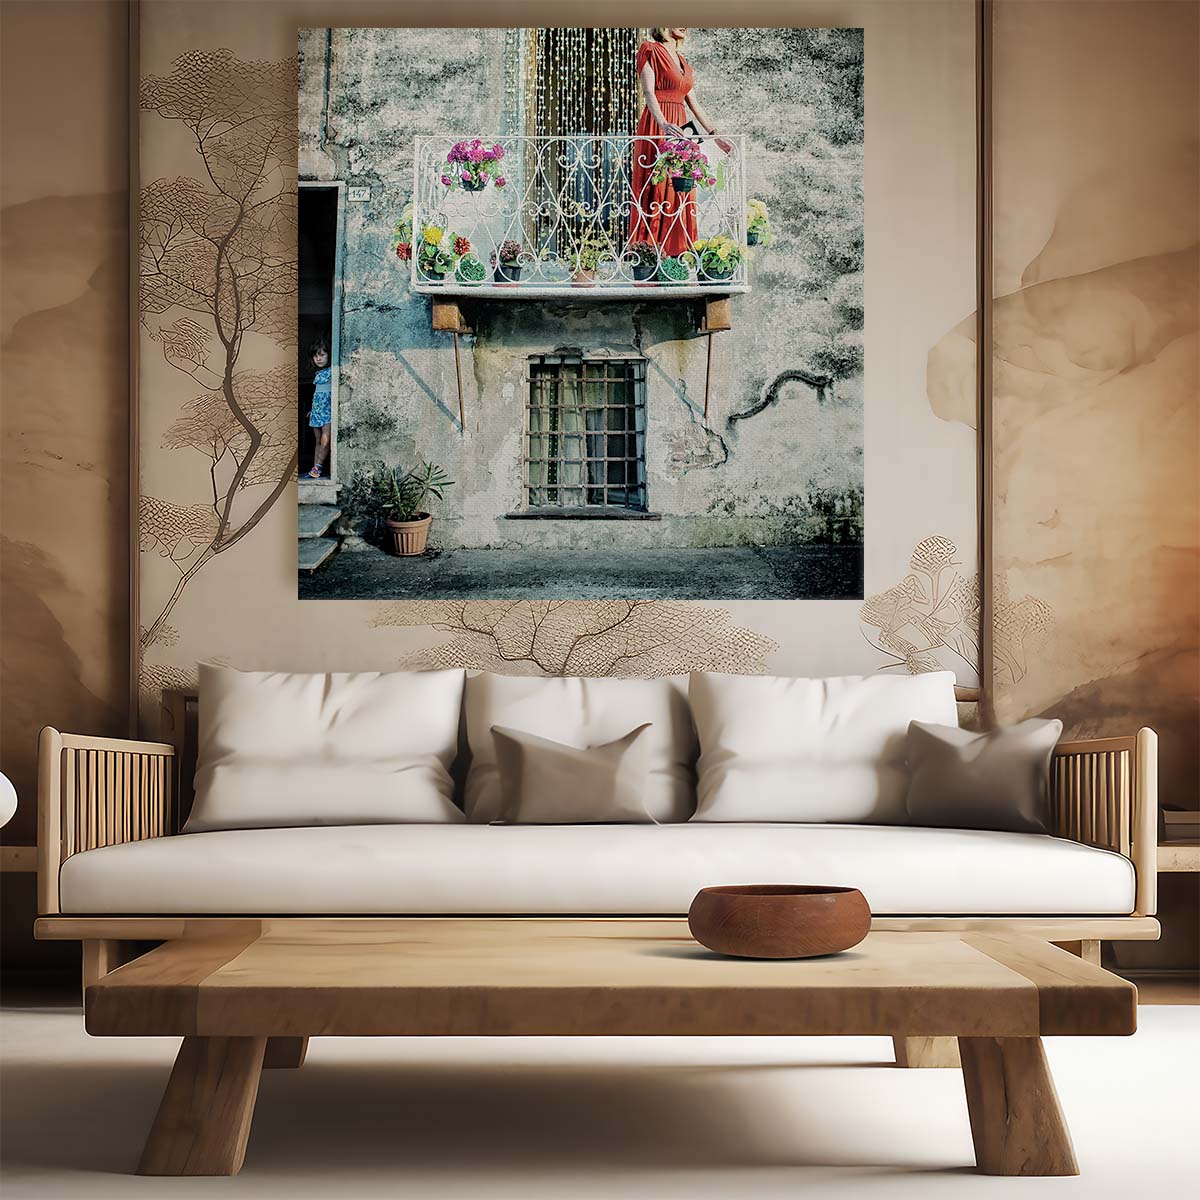 Colorful Summer Floral & Golden Chains Woman Portrait Wall Art by Luxuriance Designs. Made in USA.